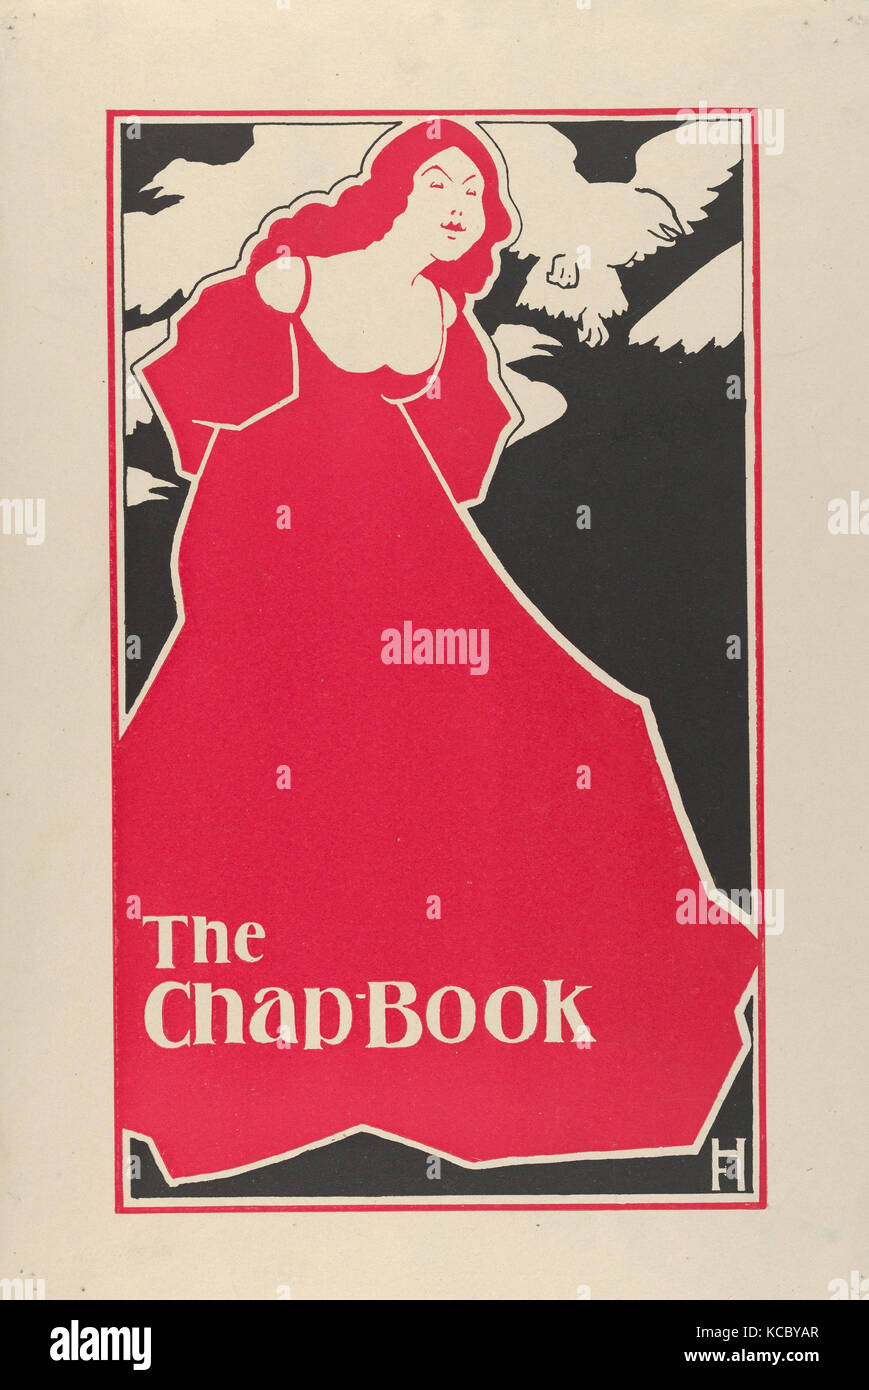 The Chap-Book, 1895, Commercial relief process, Sheet: 16 1/8 × 10 7/8 in. (41 × 27.6 cm), Frank Hazenplug (American, 1873/74 Stock Photo